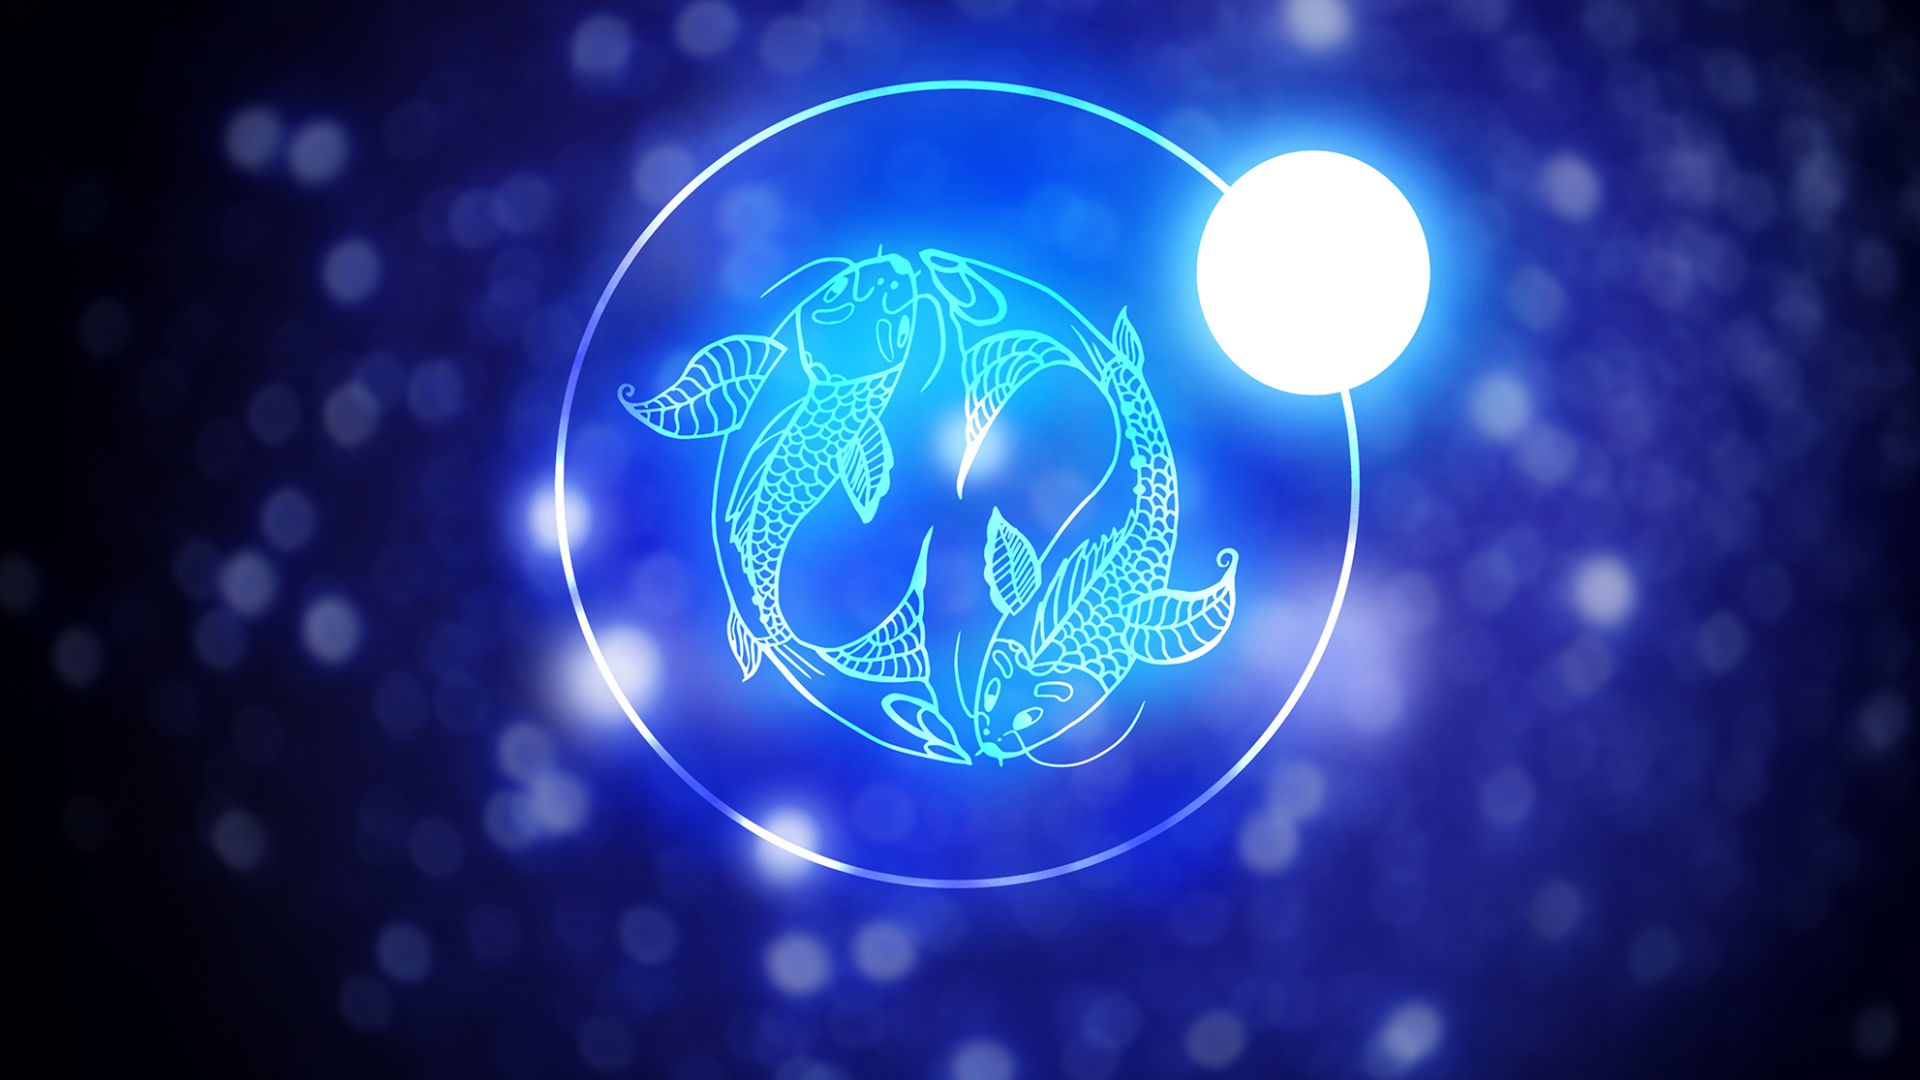 What Is The March Zodiac Sign?